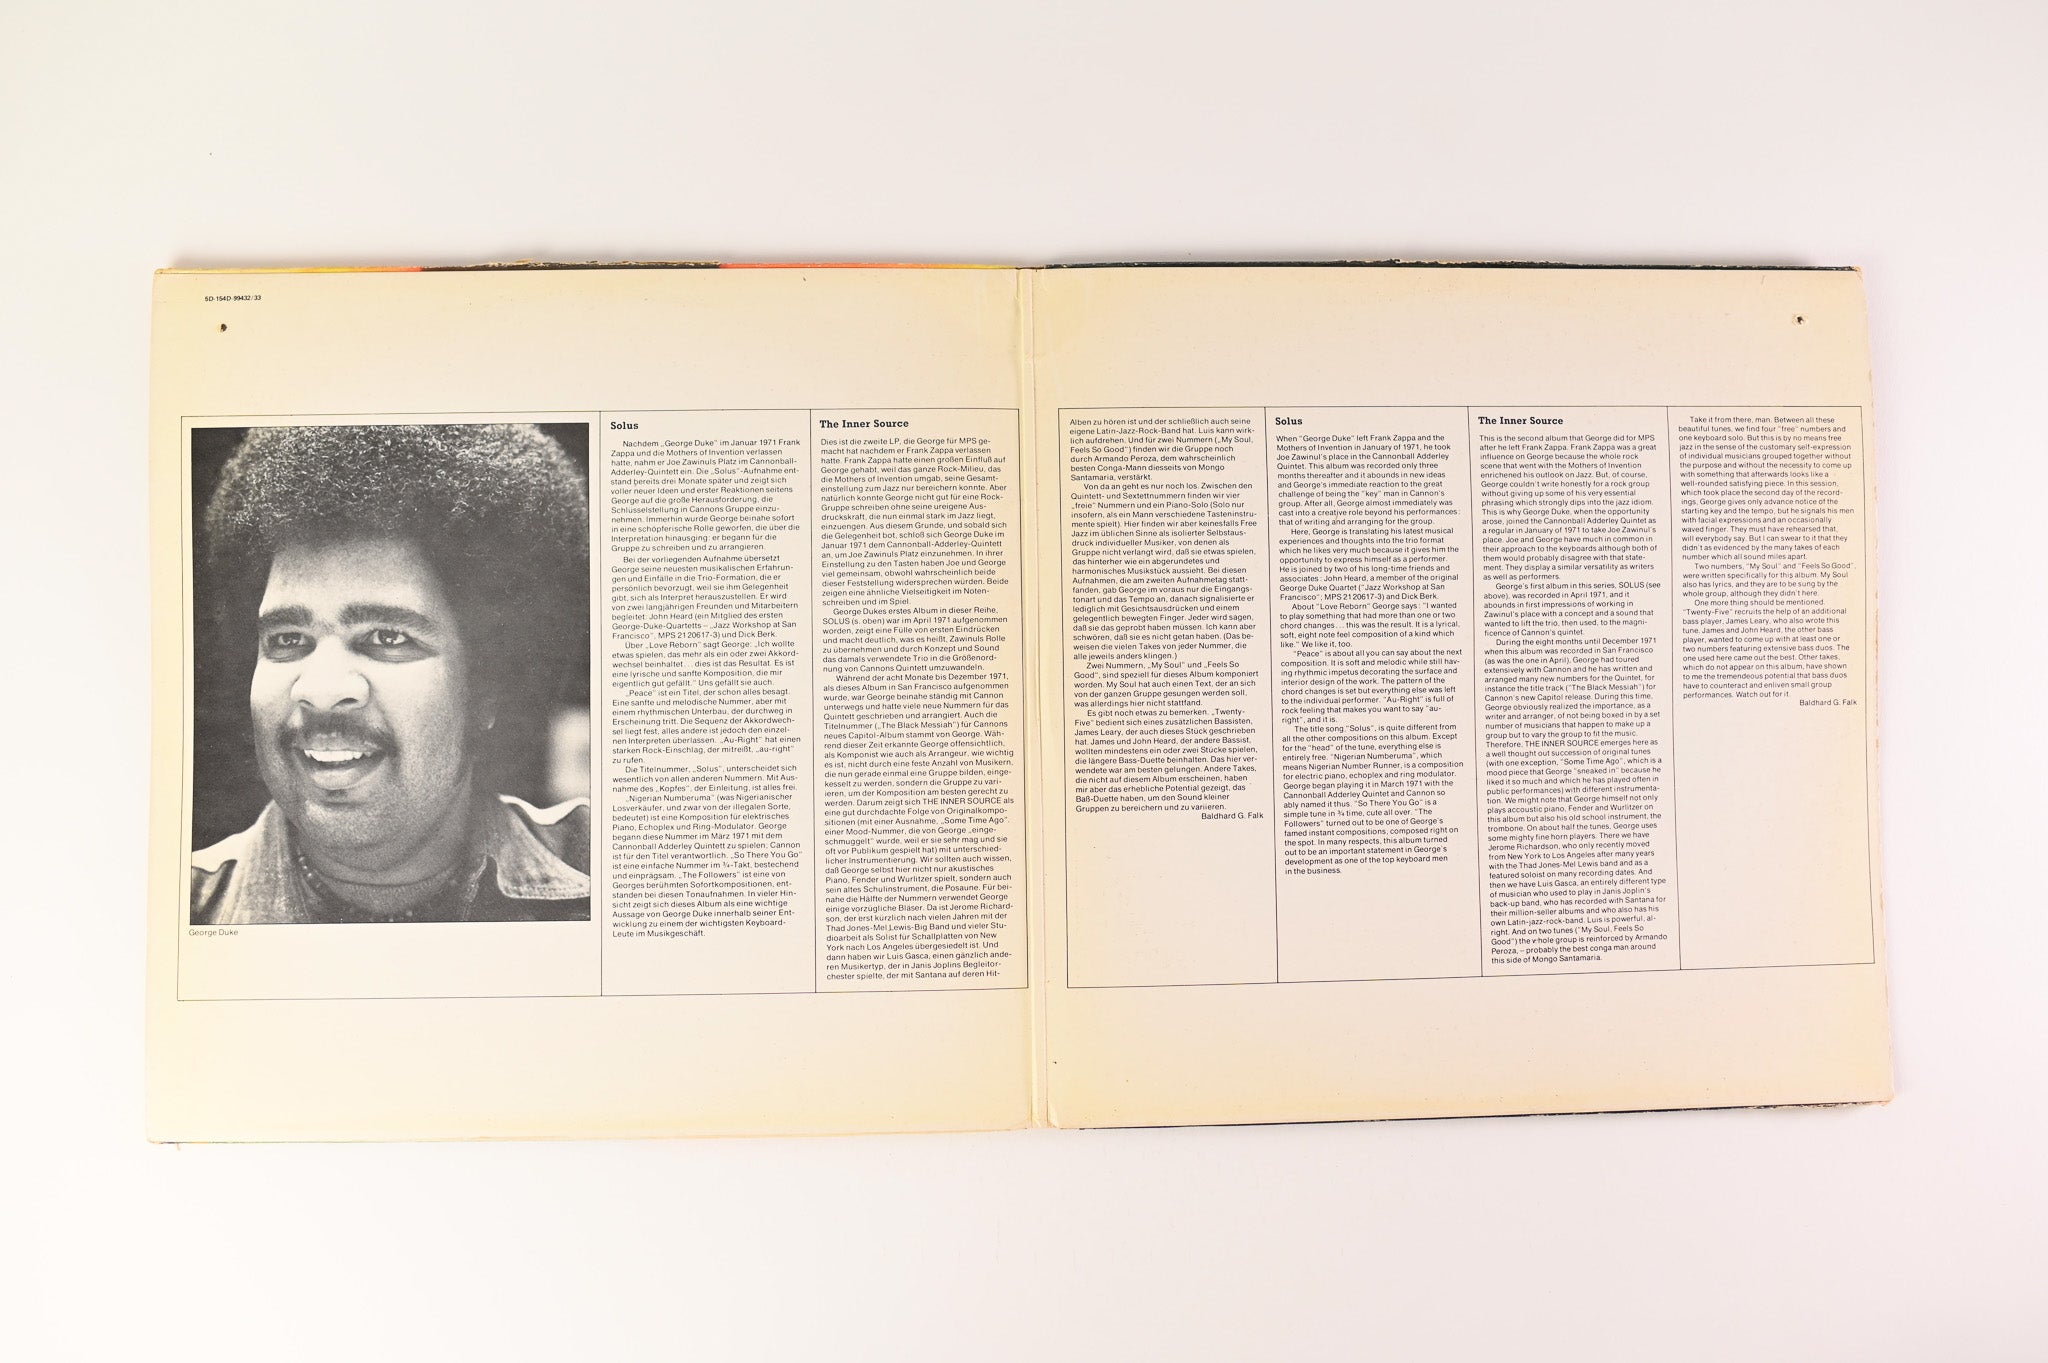 George Duke - The Inner Source on MPS Netherlands Press